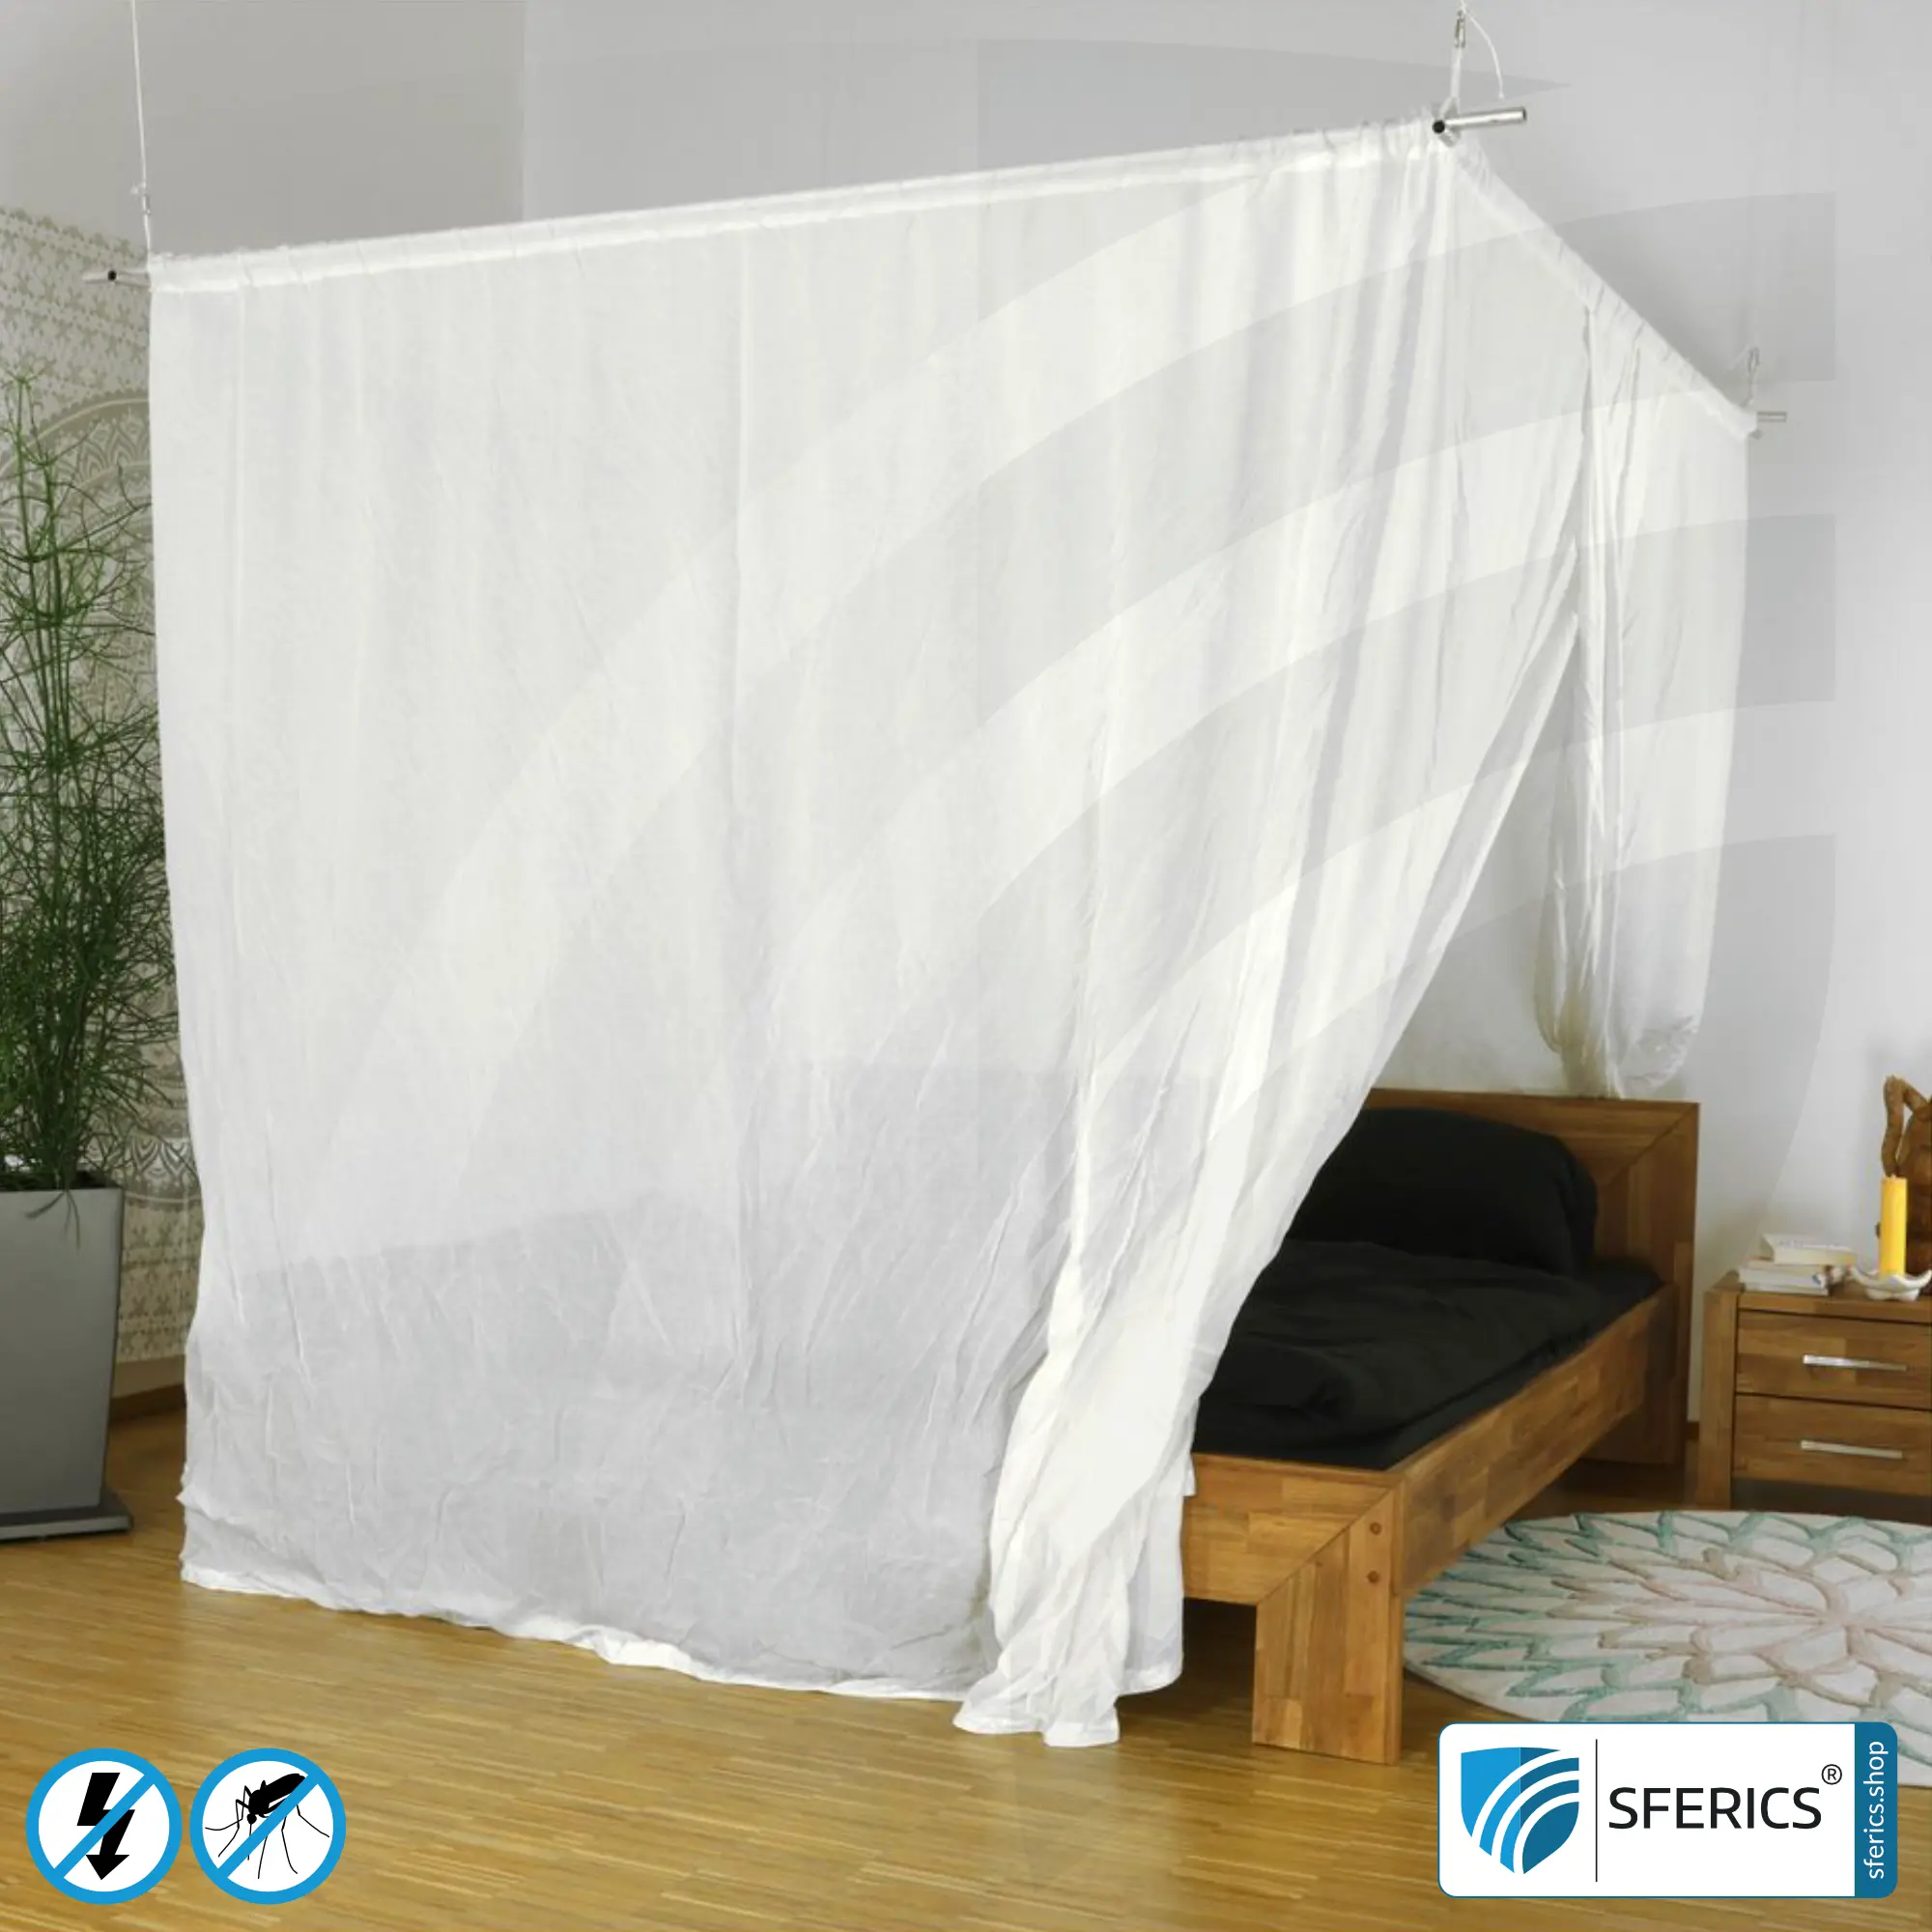 Shielding canopy electrosmog RF | DOUBLE BED or GRAND KING SIZE | Shielding radio up to 99.99 % (40 dB). Effective against mobile phone radiation, WIFI, etc.